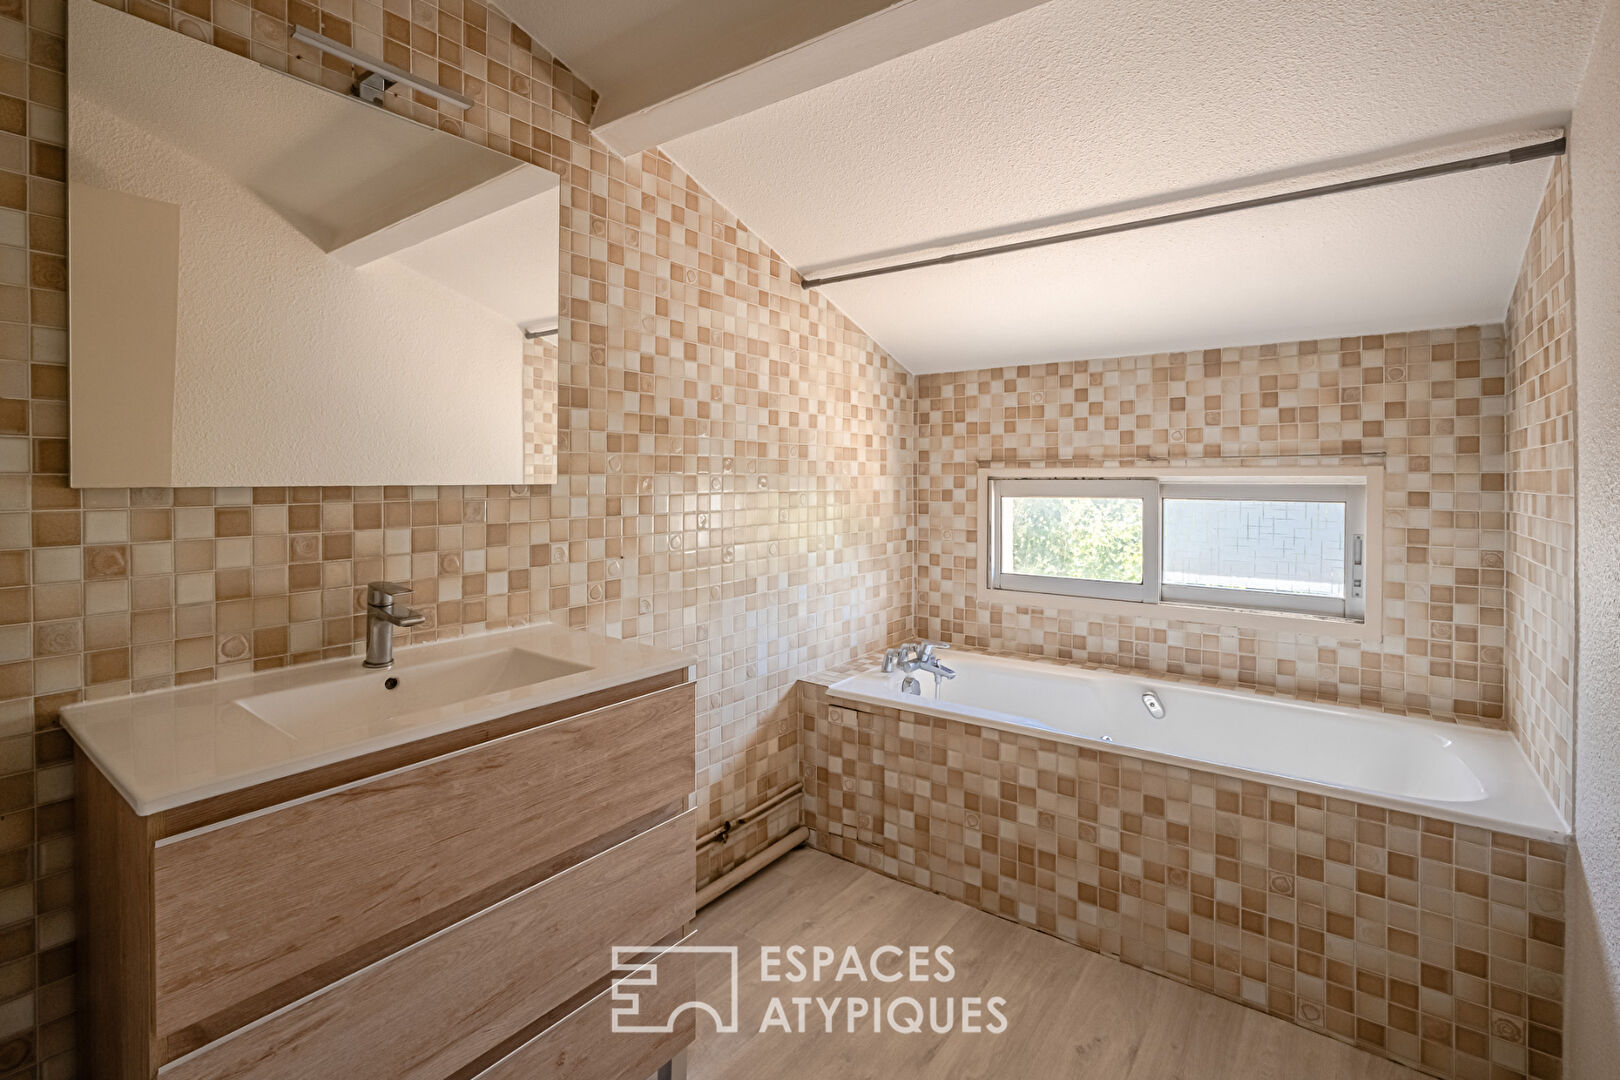 Top-floor apartment in downtown Narbonne